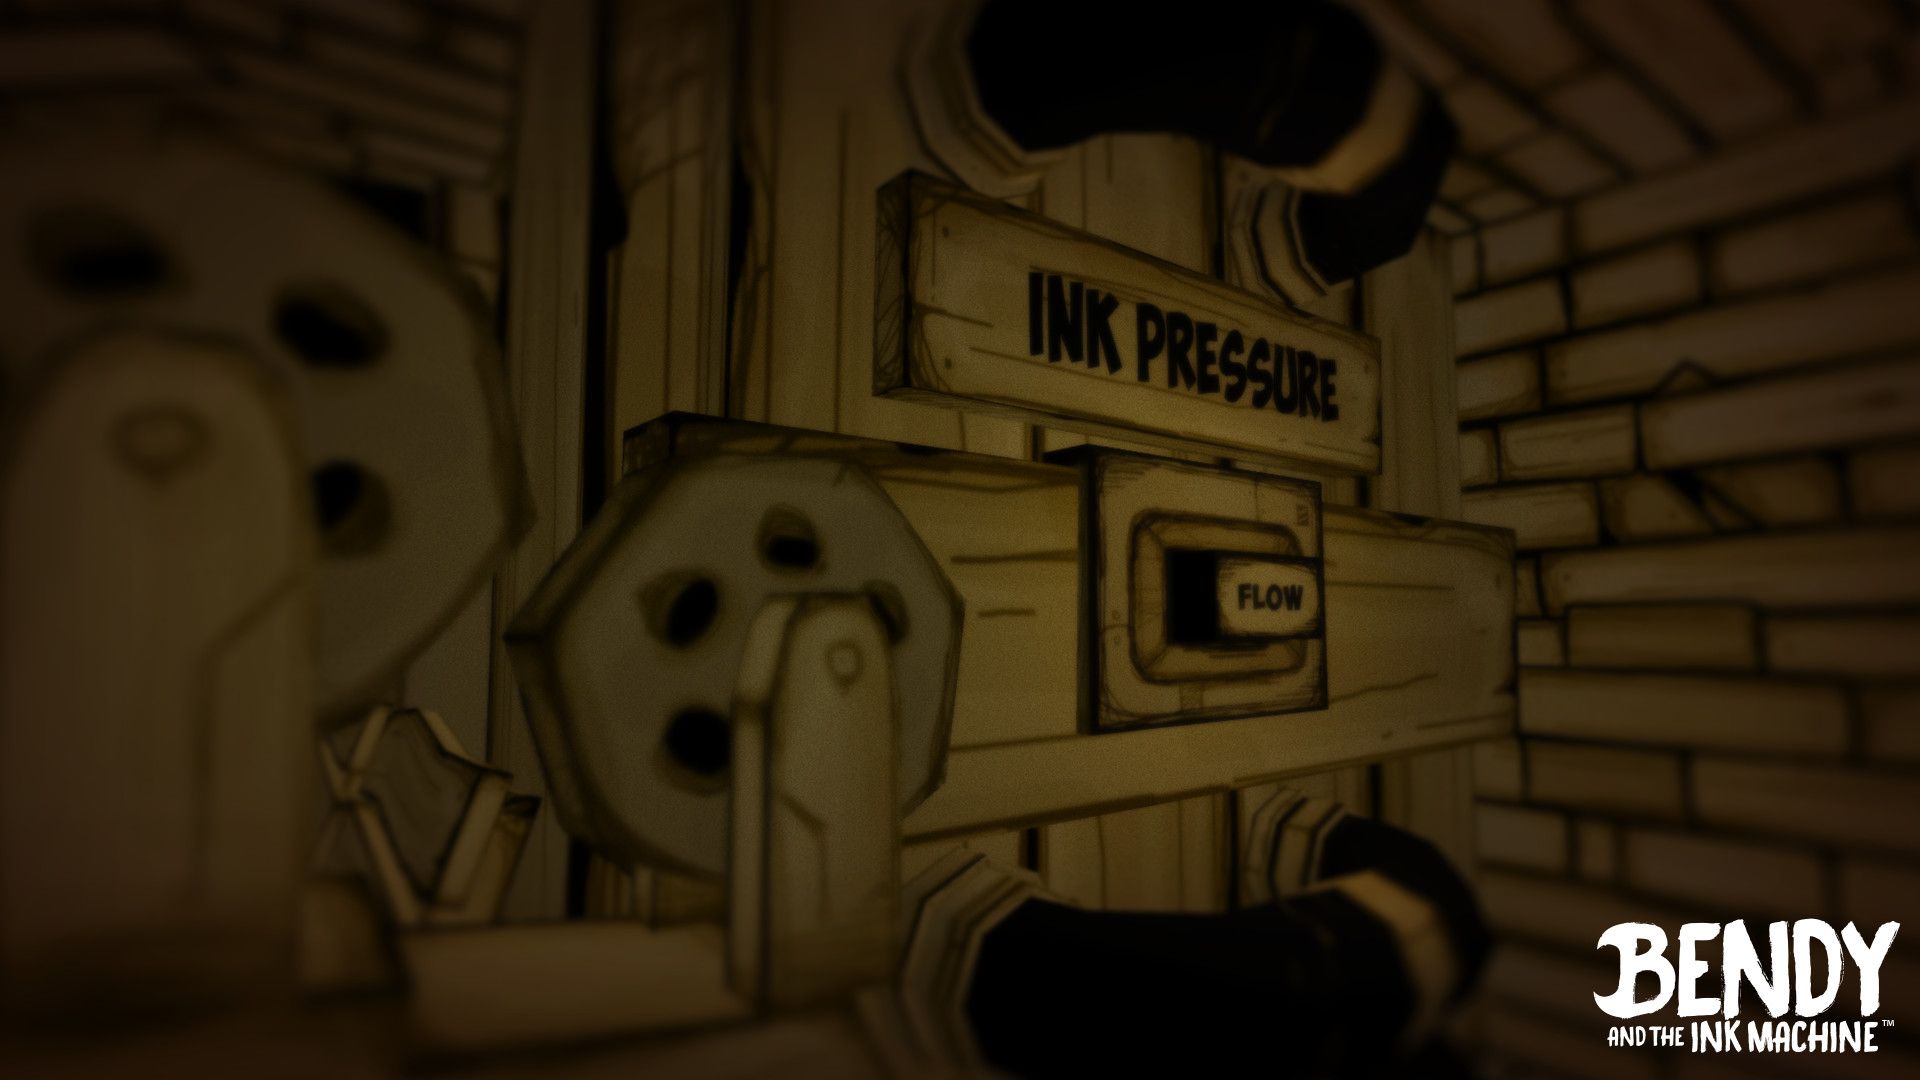 Bendy And The Ink Machine Wallpaper ① And The Ink